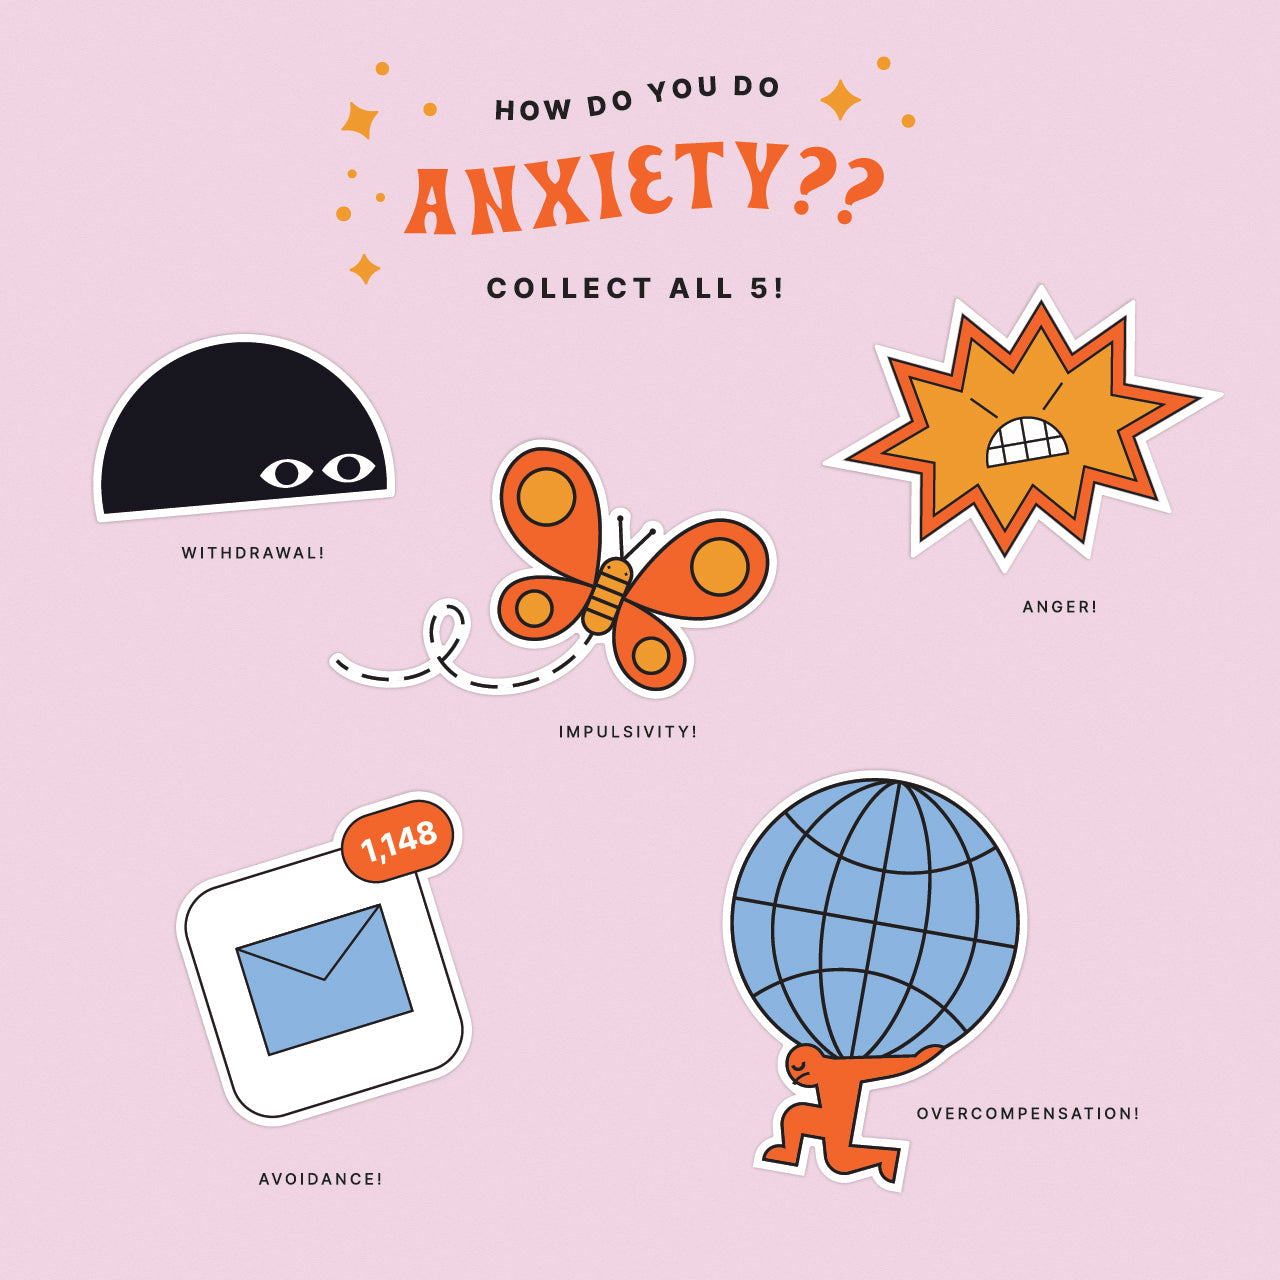 Anger: An Anxiety Language Sticker